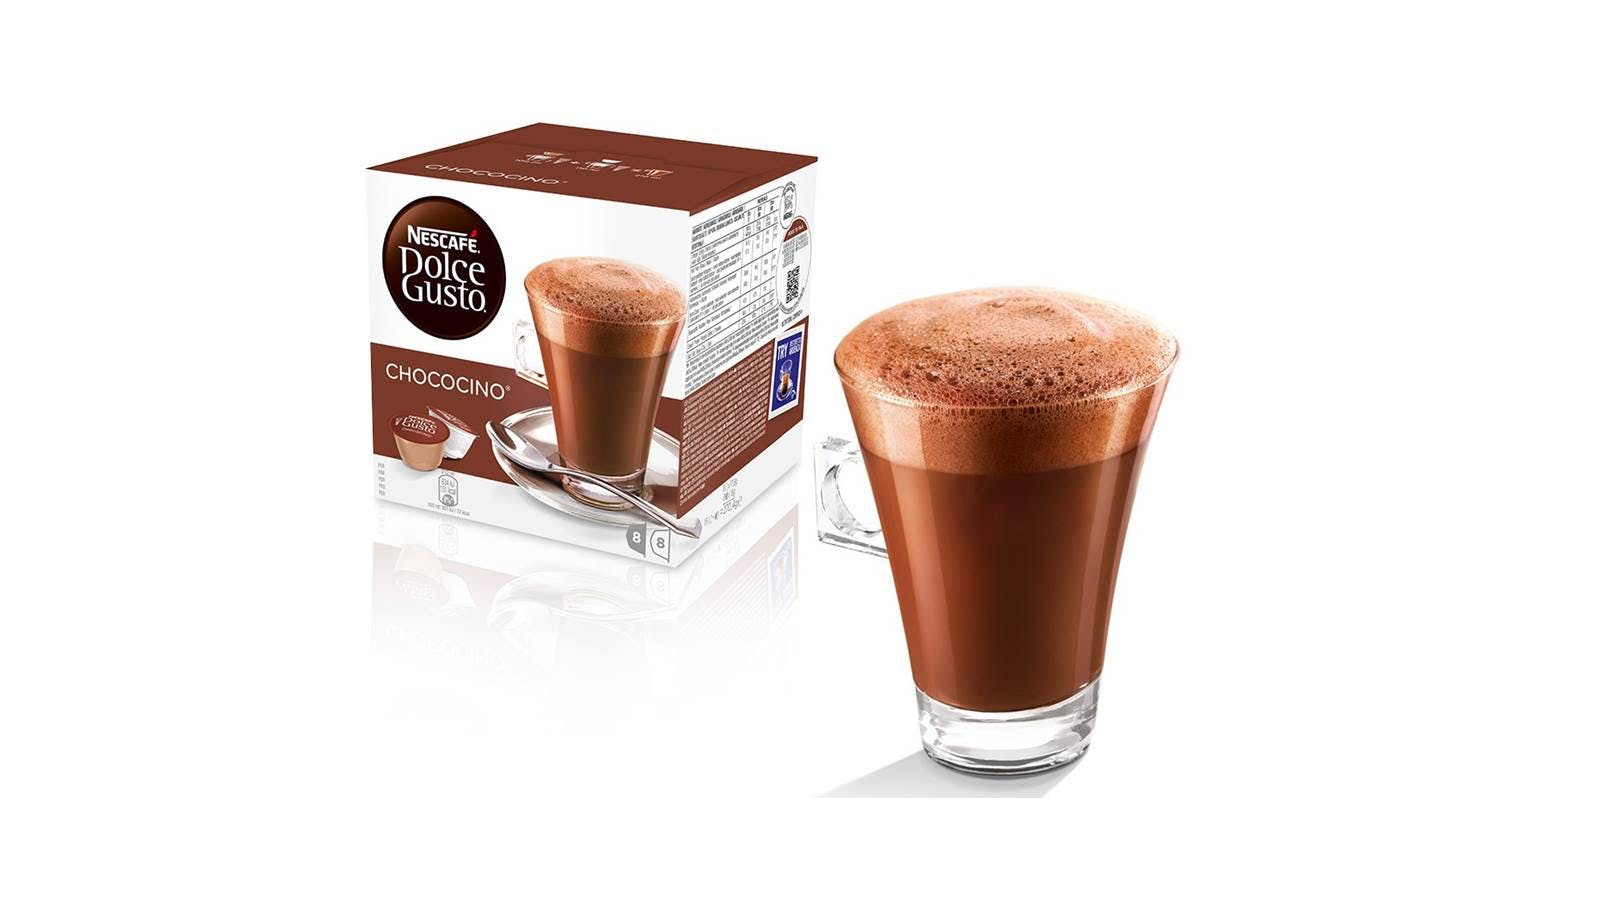 https://hnsgsfp.imgix.net/9/images/detailed/11/NESCAFE_DOLCE_GUSTO_CHOCOCINO.jpg?fit=fill&bg=0FFF&w=1600&h=900&auto=format,compress